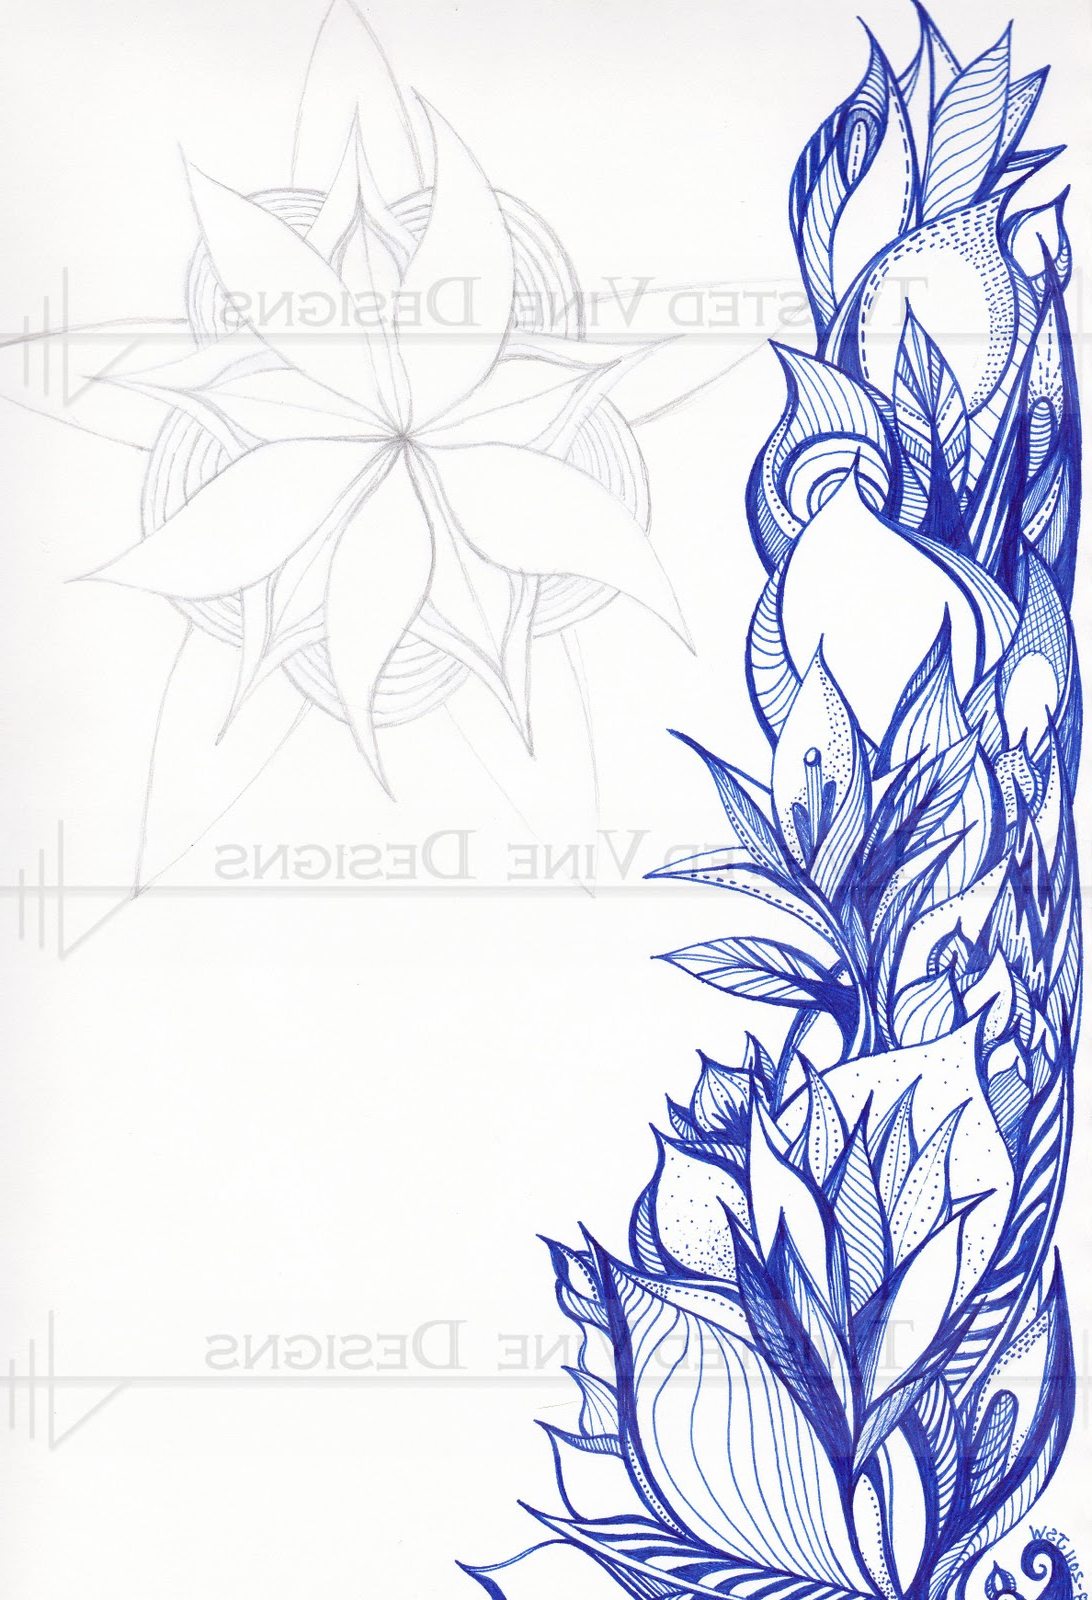 Flowers And Vines Drawing at GetDrawings.com | Free for personal use